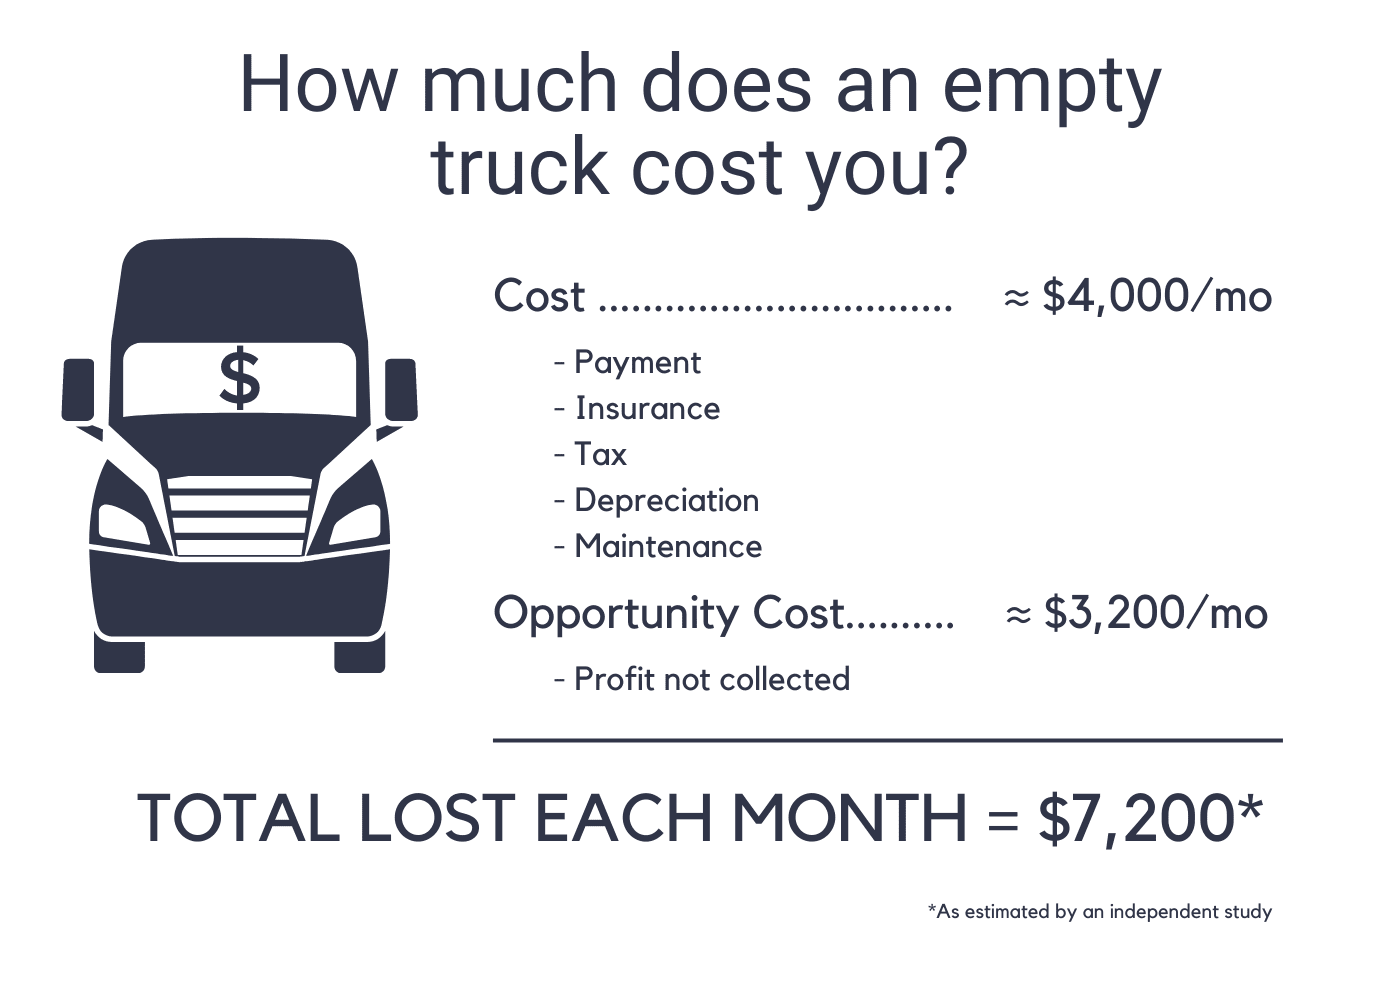 I'm Losing How Much on This Empty Truck